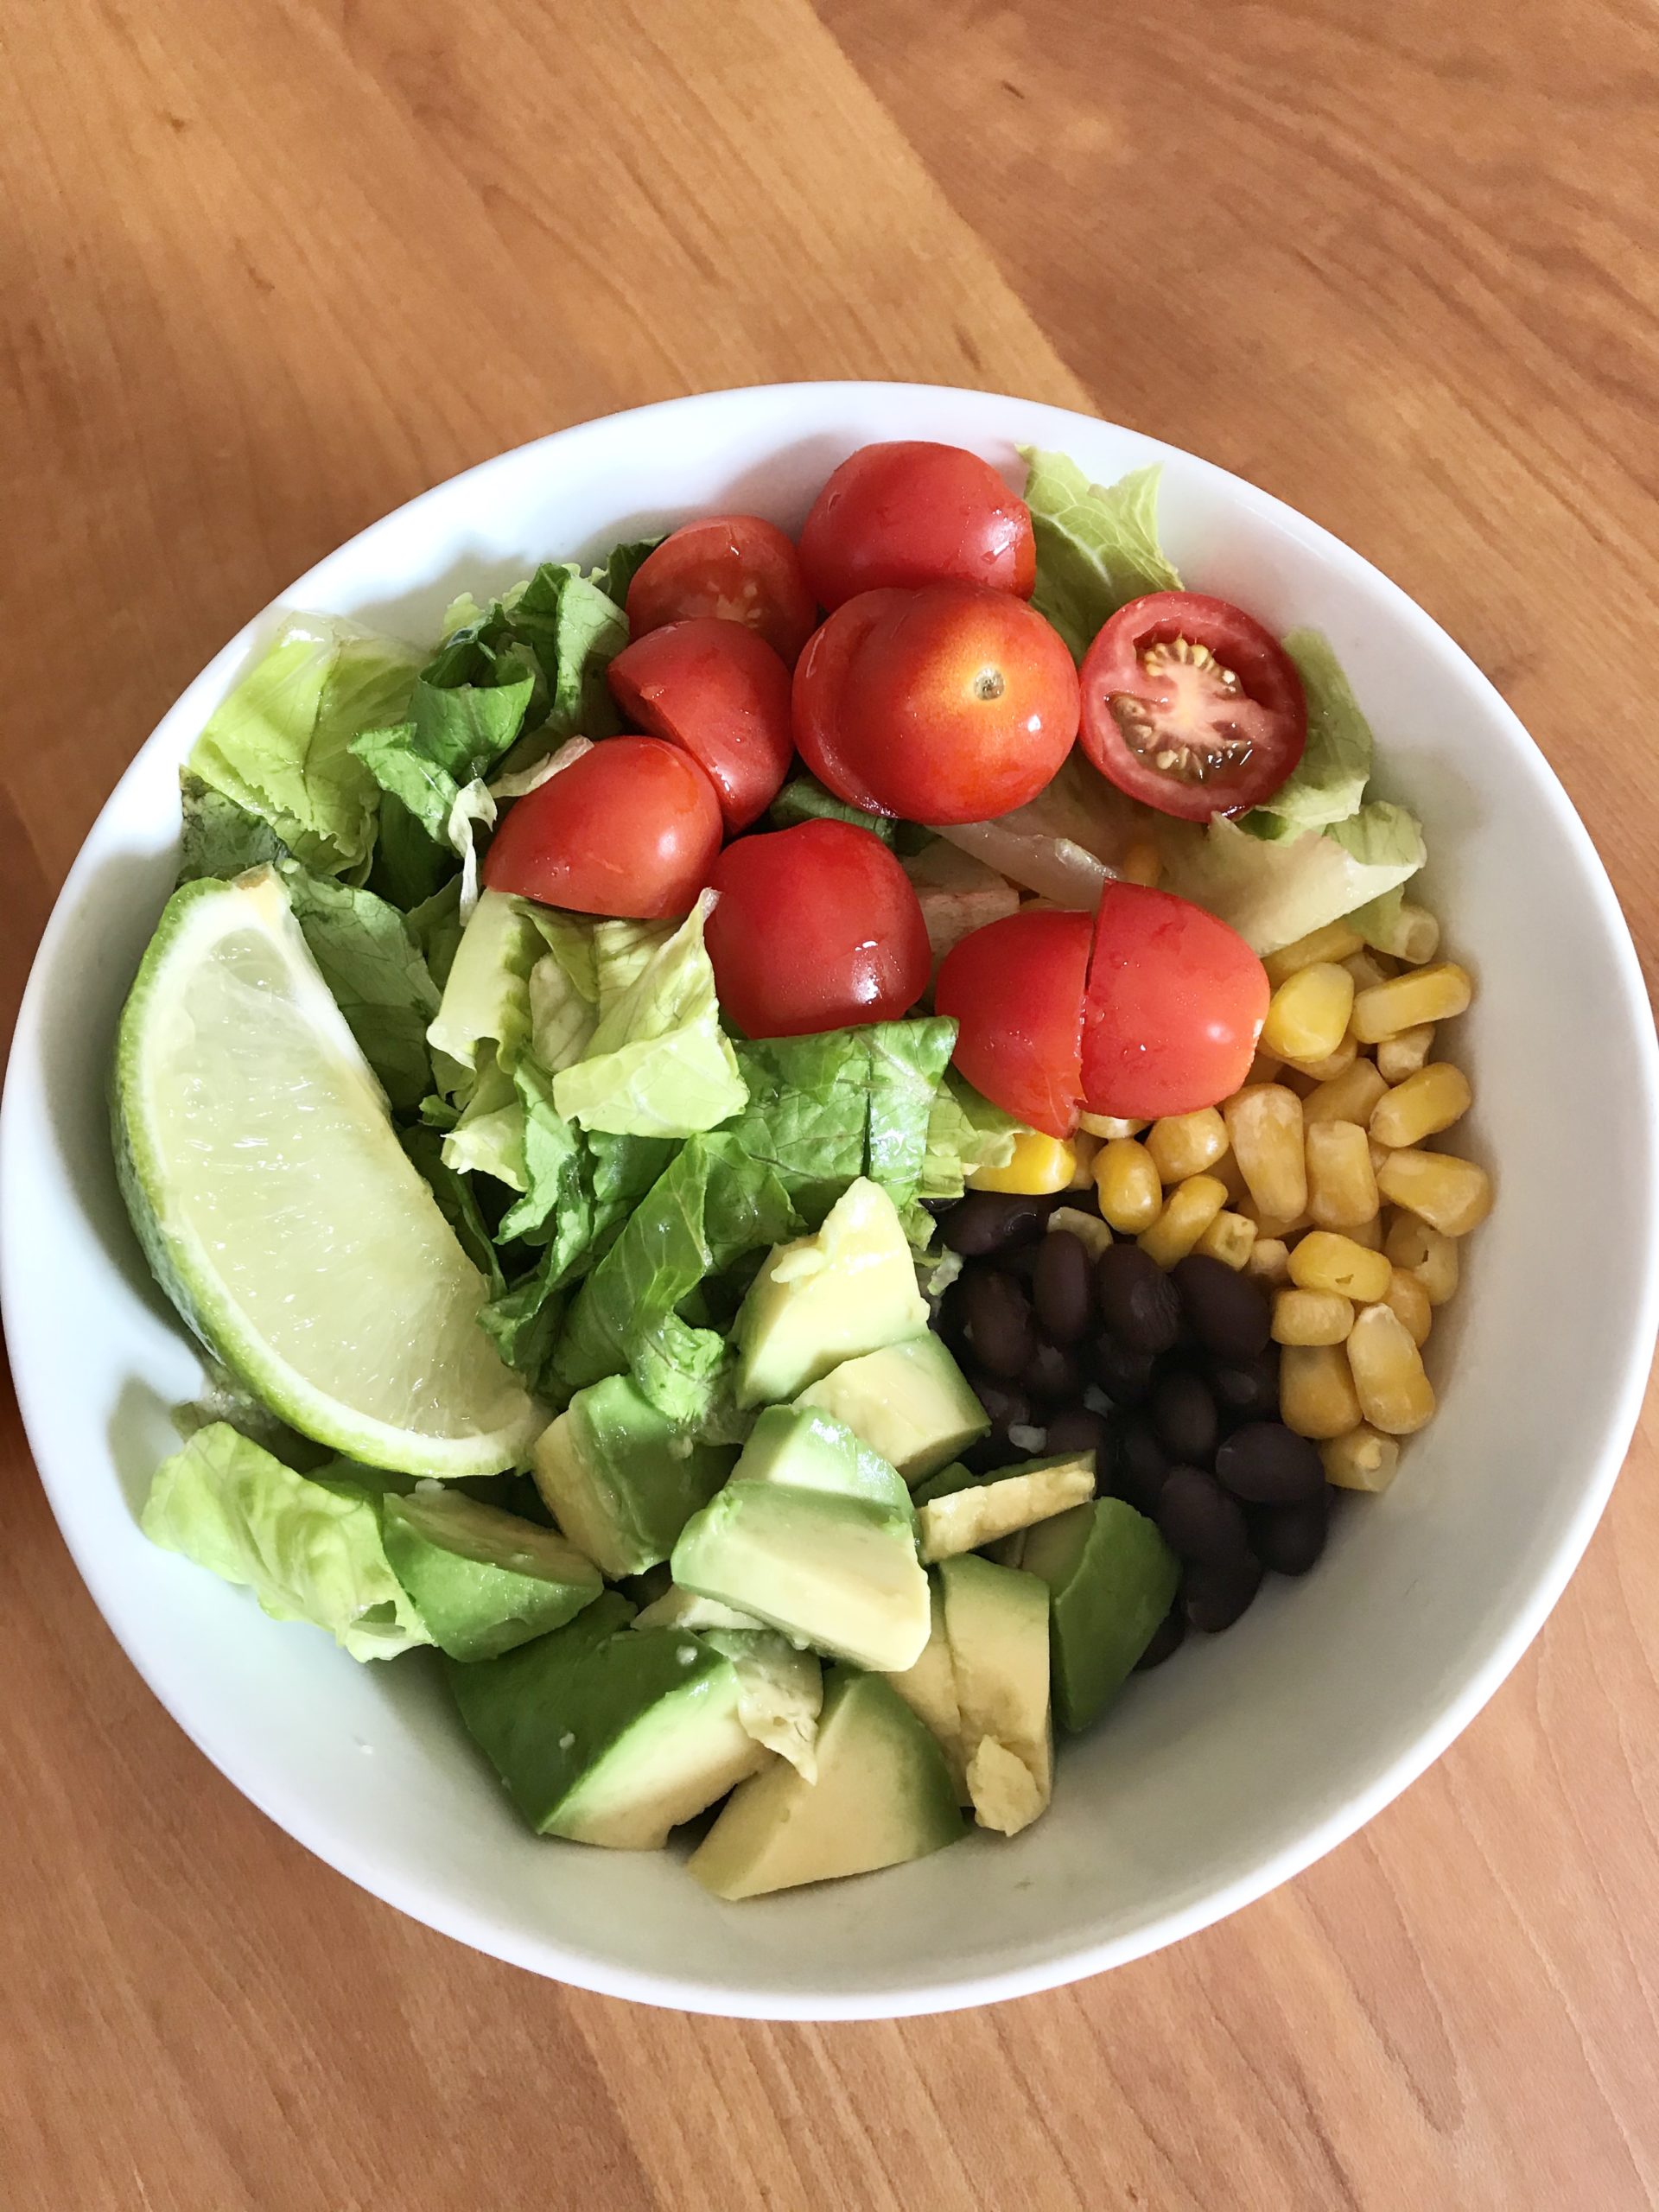 Burrito bowl recipe – healthy eating, exercise and good nutrition